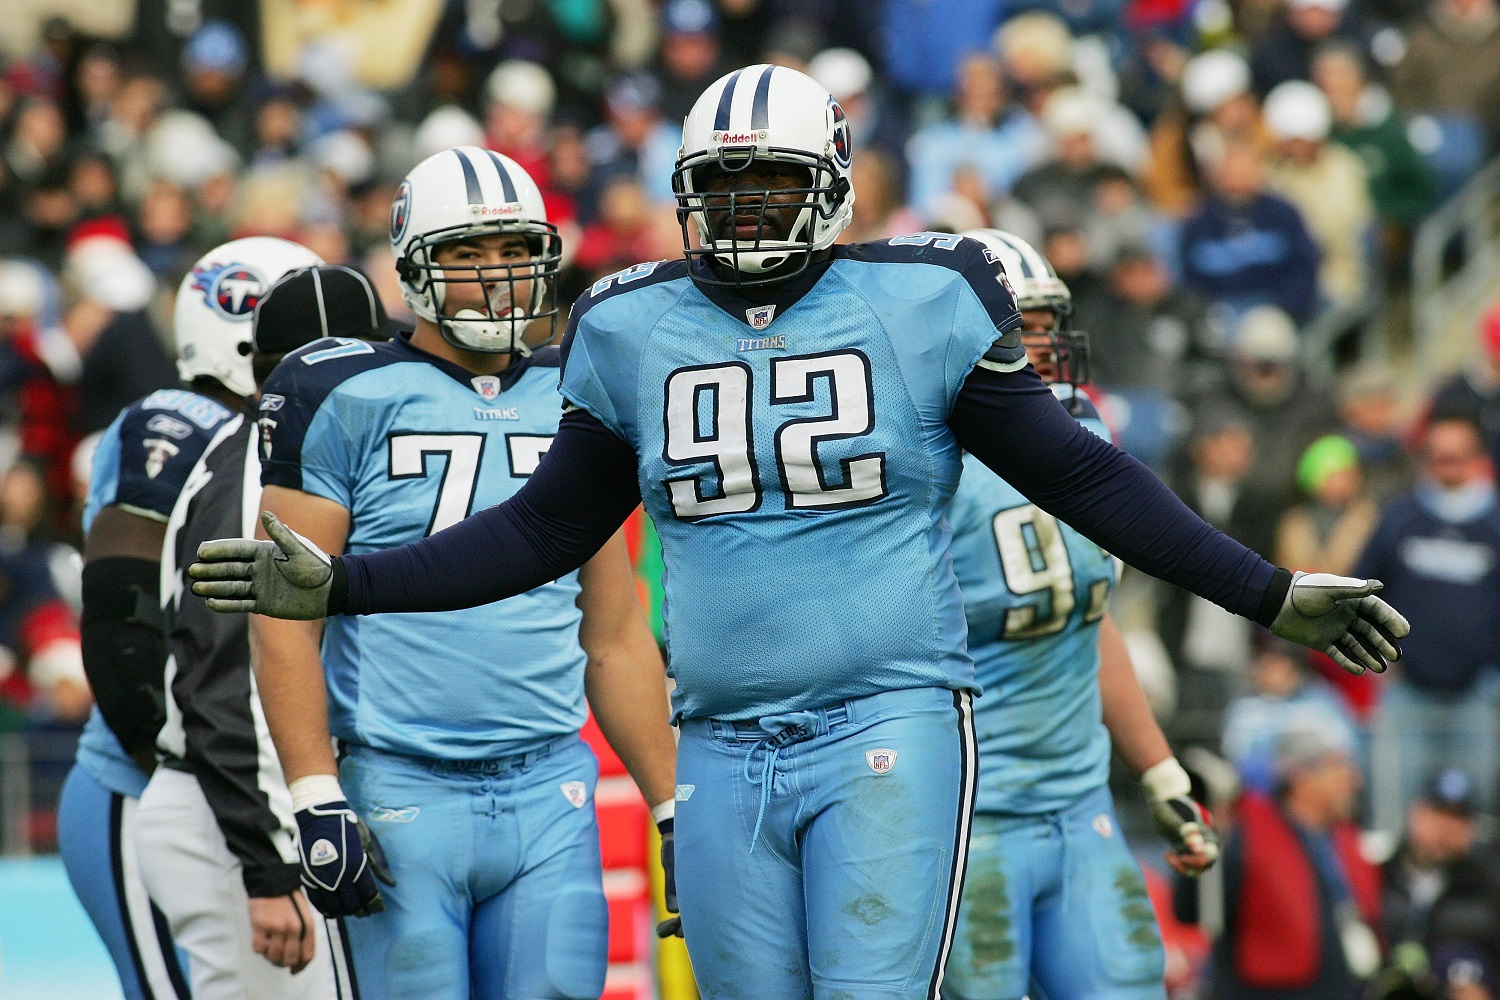 Defensive tackle Albert Haynesworth of the Tennessee Titans looks on against the Indianapolis Colts on Dec. 1, 2006.